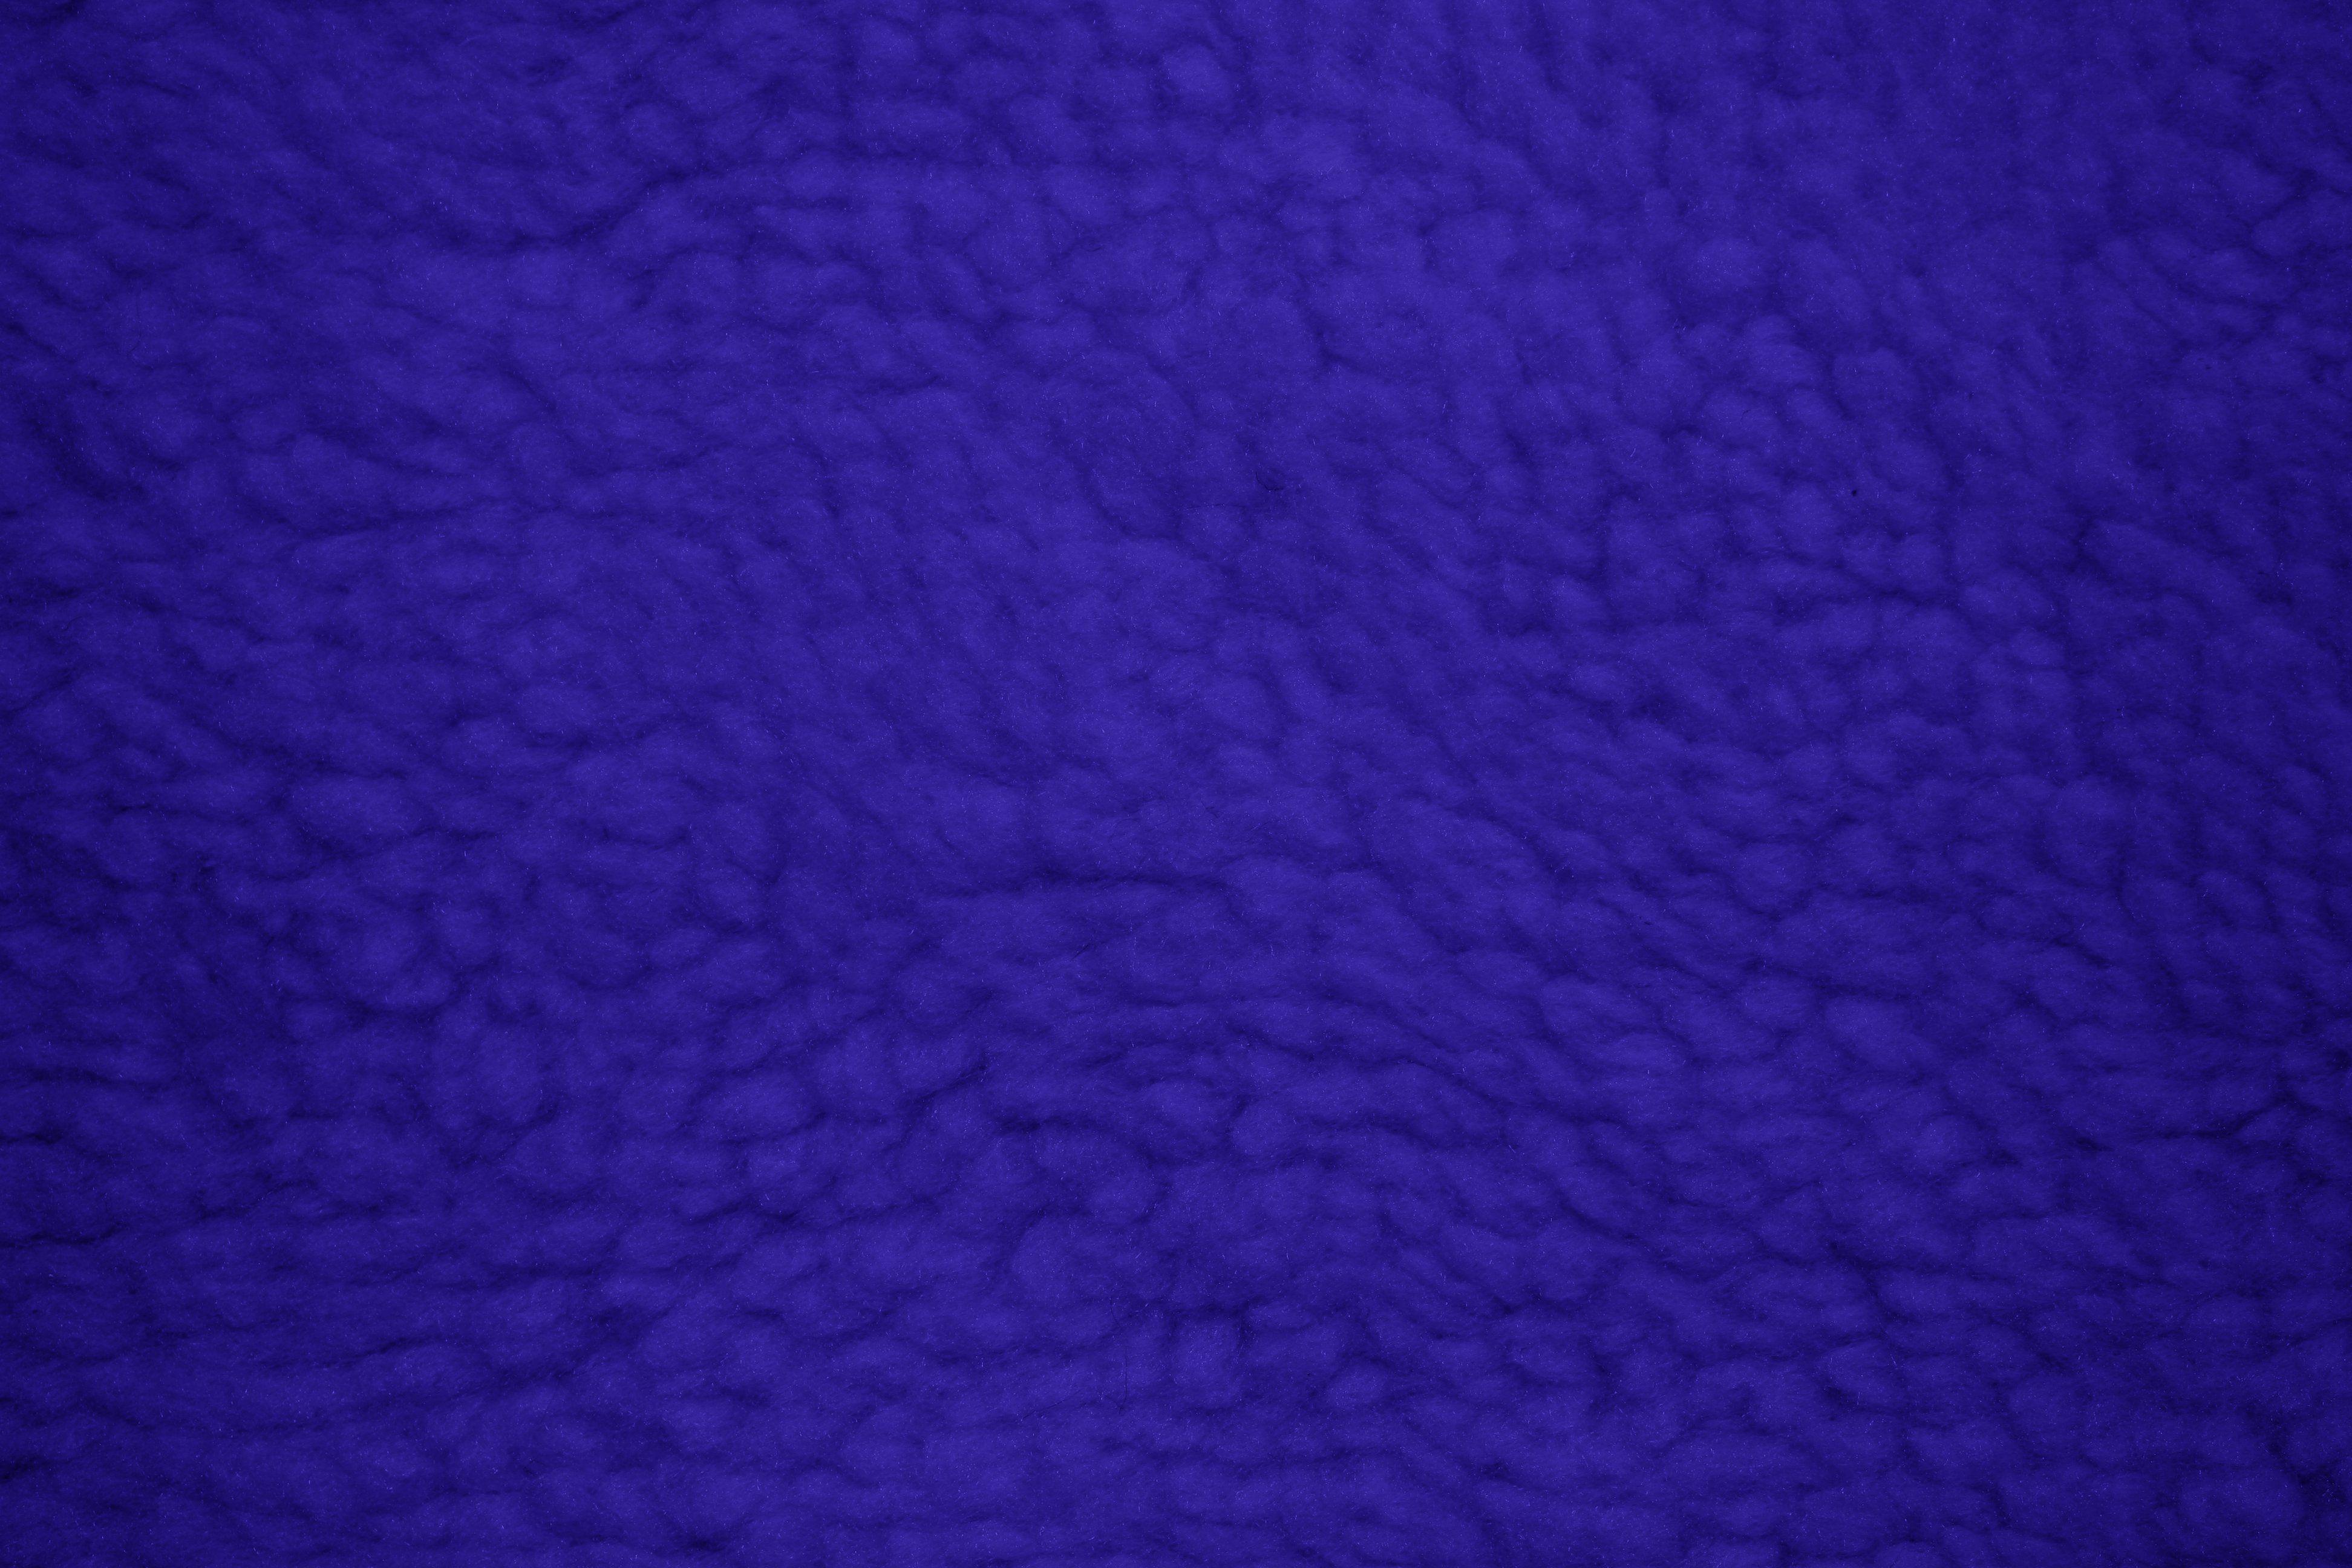 Fleece Faux Sherpa Wool Fabric Texture Royal Blue Picture. Free